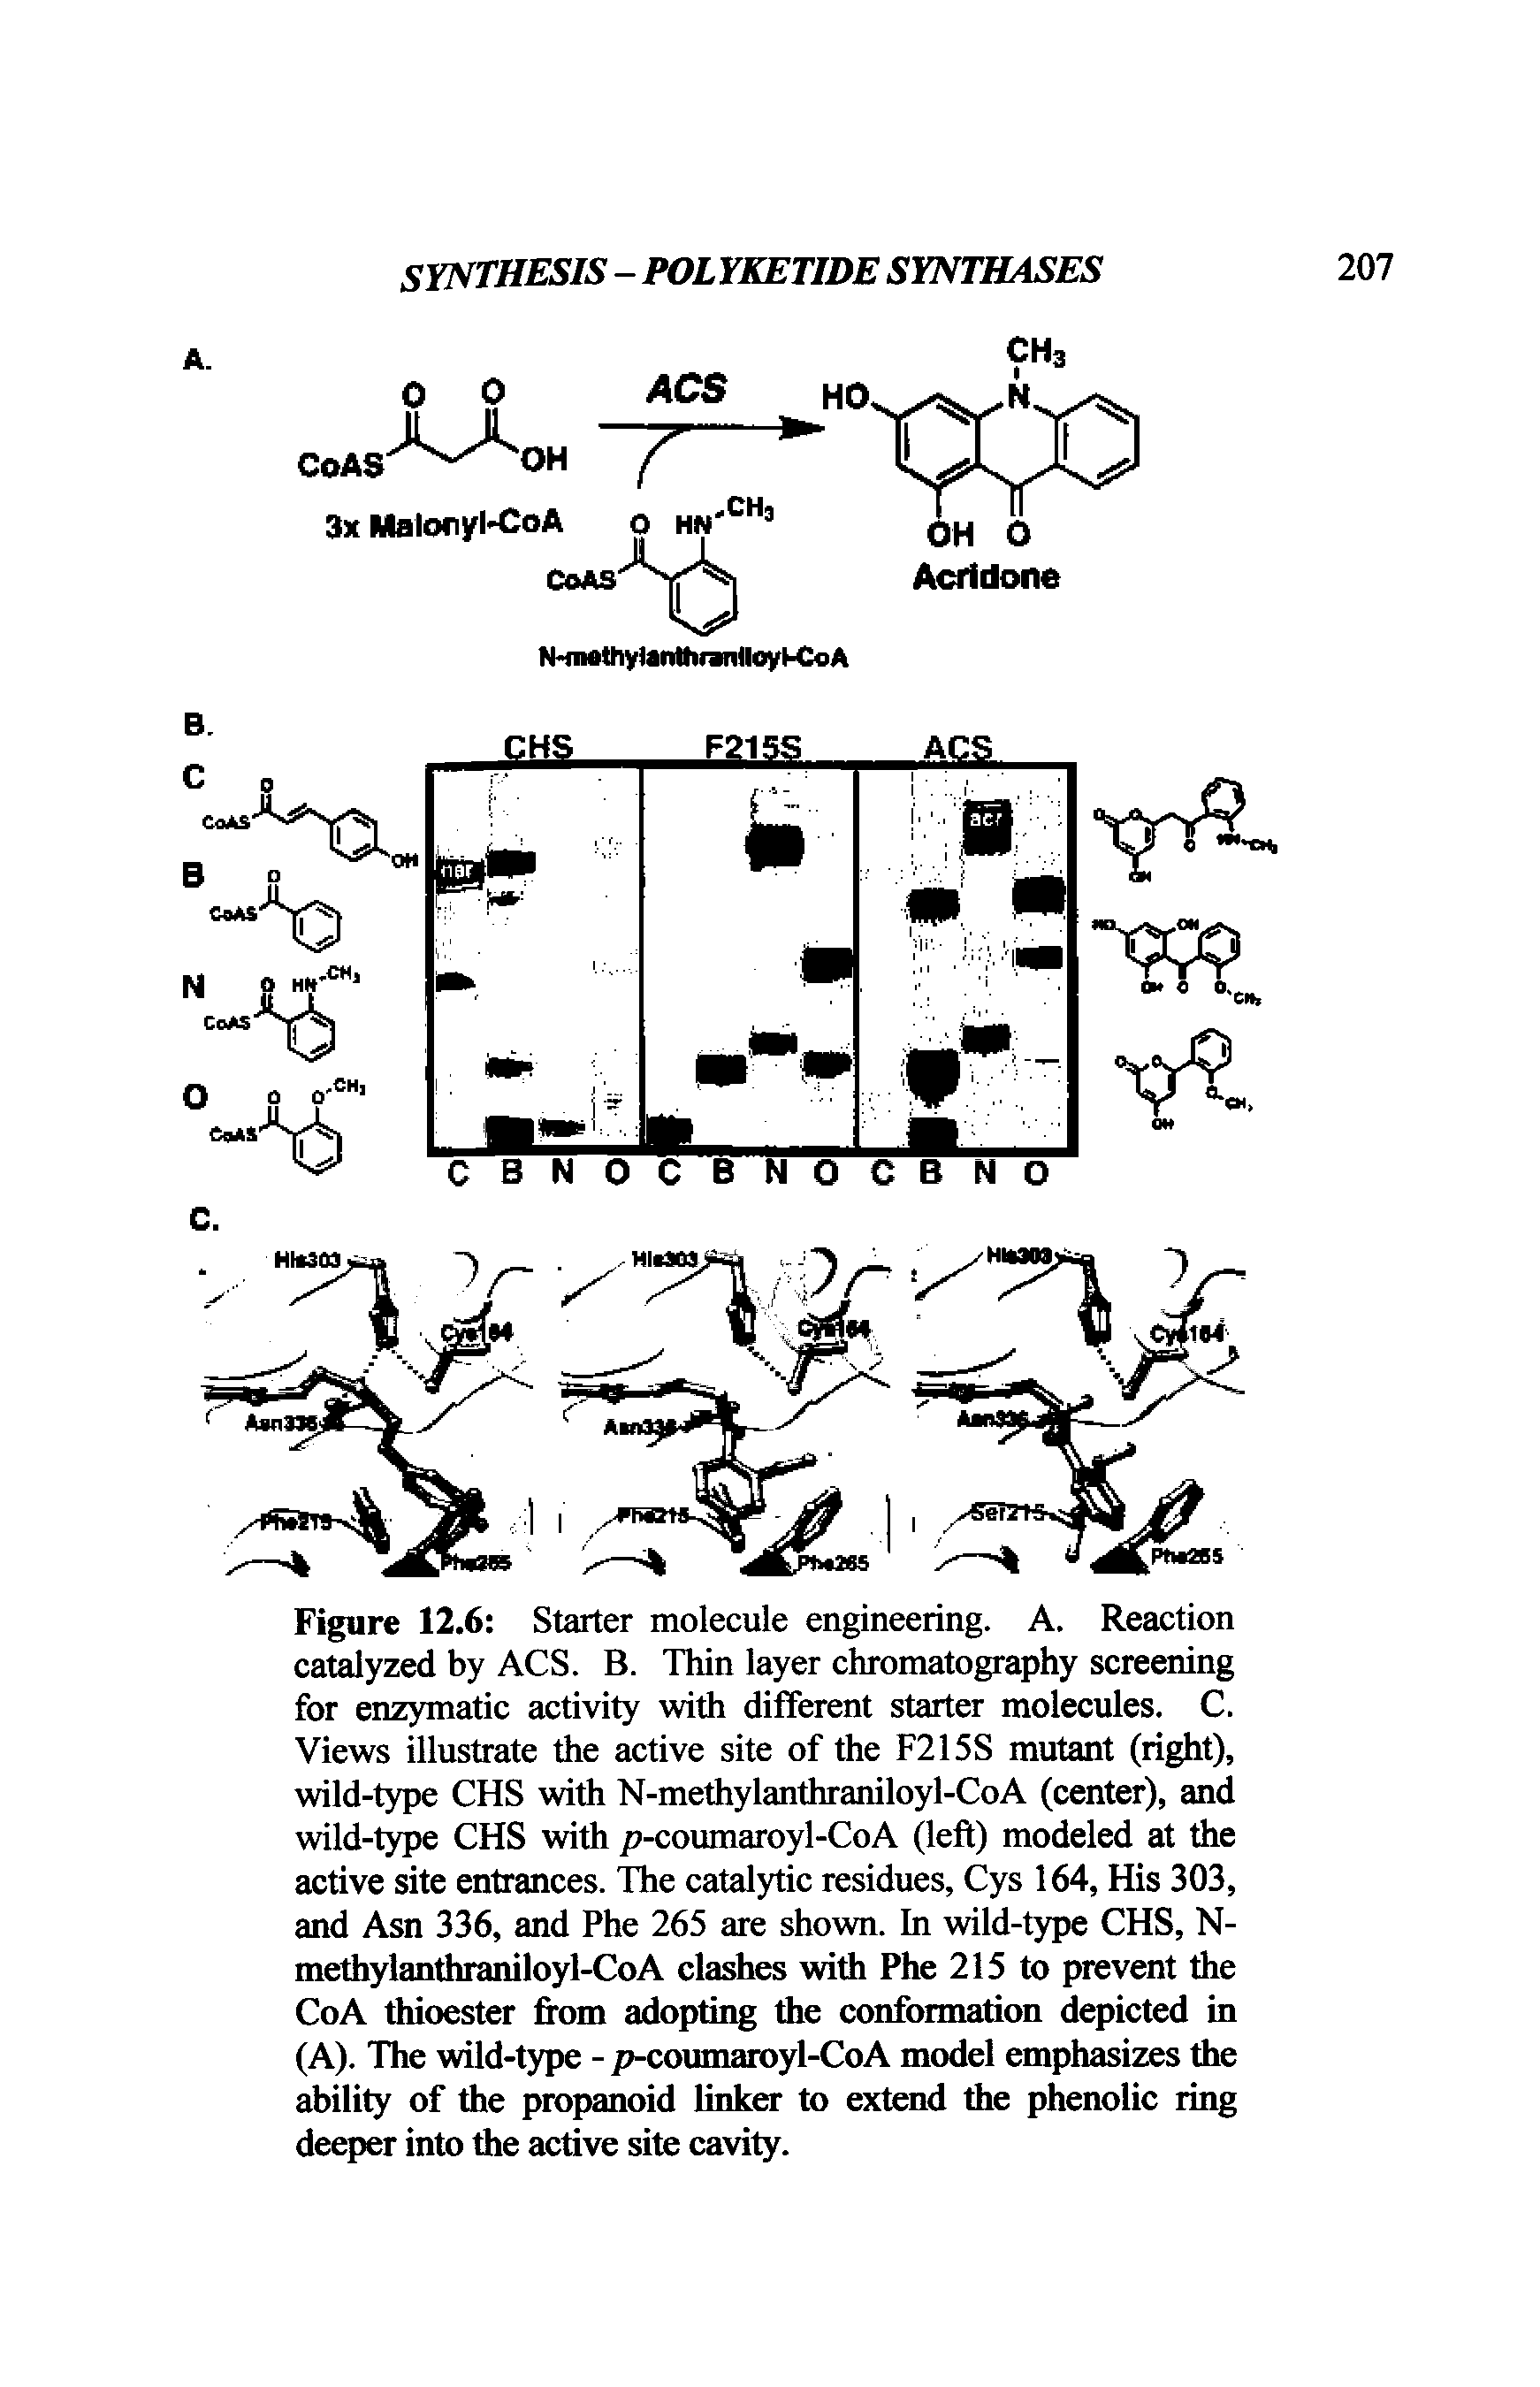 Figure 12.6 Starter molecule engineering. A. Reaction catalyzed by ACS. B. Thin layer chromatography screening for enzymatic activity with different starter molecules. C. Views illustrate the active site of the F215S mutant (right), wild-type CHS with N-methylanthraniloyl-CoA (center), and wild-type CHS with p-coumaroyl-CoA (left) modeled at the active site entrances. The catalytic residues, Cys 164, His 303, and Asn 336, and Phe 265 are shown. In wild-type CHS, N-methylanthraniloyl-CoA clashes with Phe 215 to prevent the CoA thioester from adopting the conformation depicted in (A). The wild-type - p-coumaroyl-CoA model emphasizes the ability of the propanoid linker to extend the phenolic ring deeper into the active site cavity.